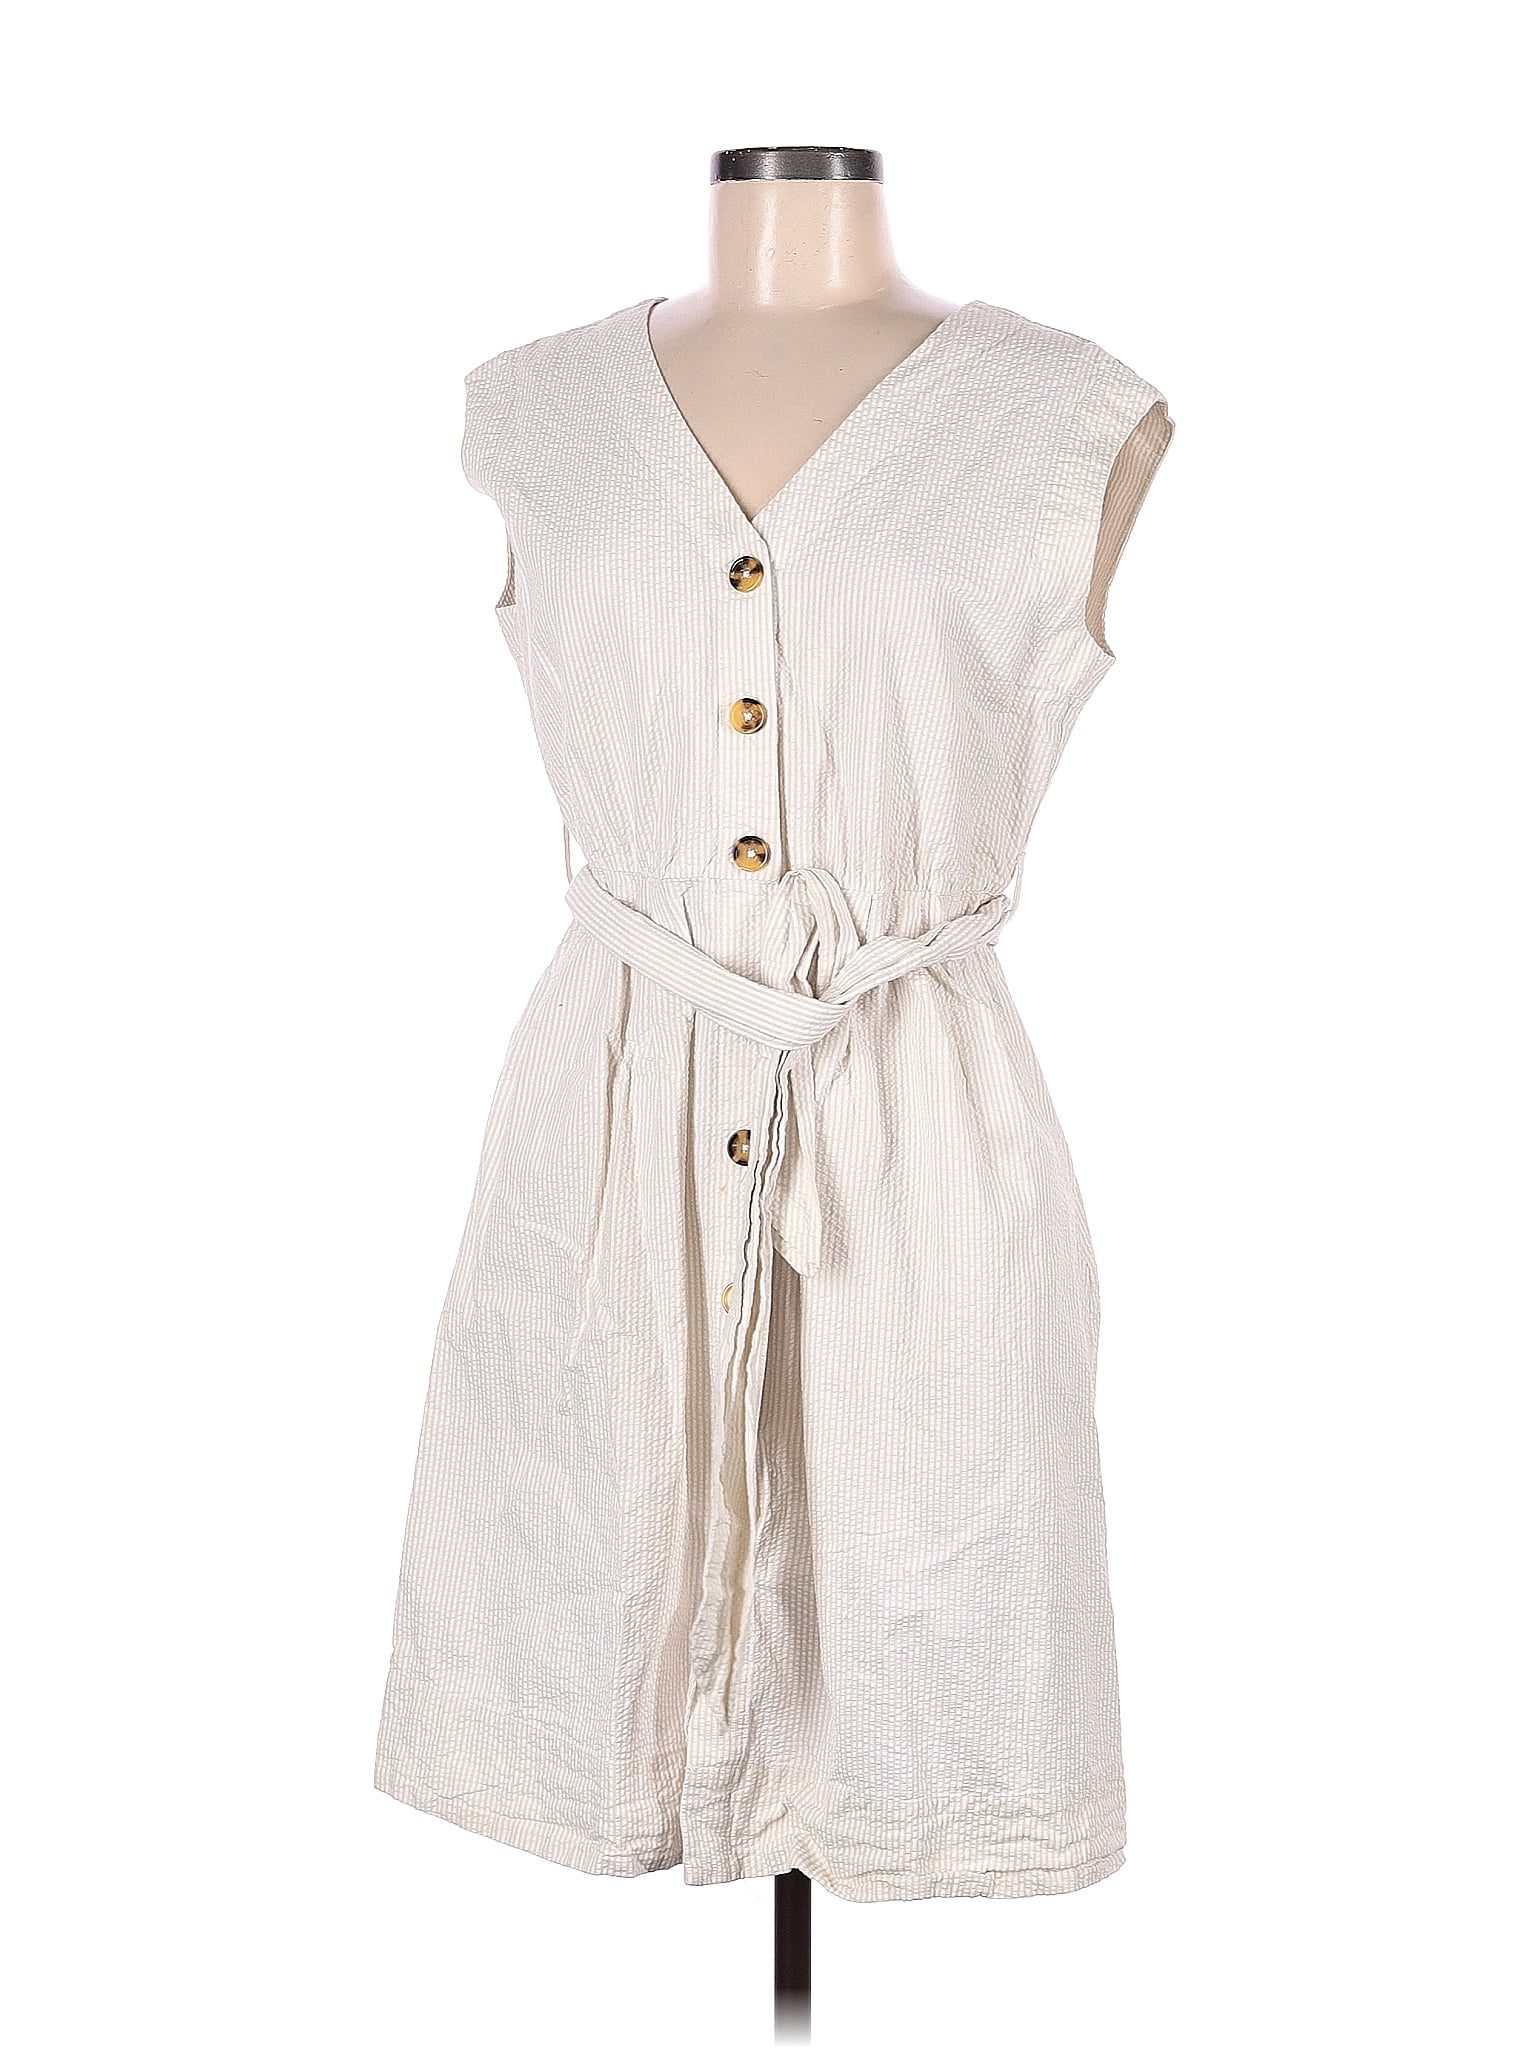 Mango 100% Cotton Solid White Ivory Casual Dress Size M - 45% off | thredUP